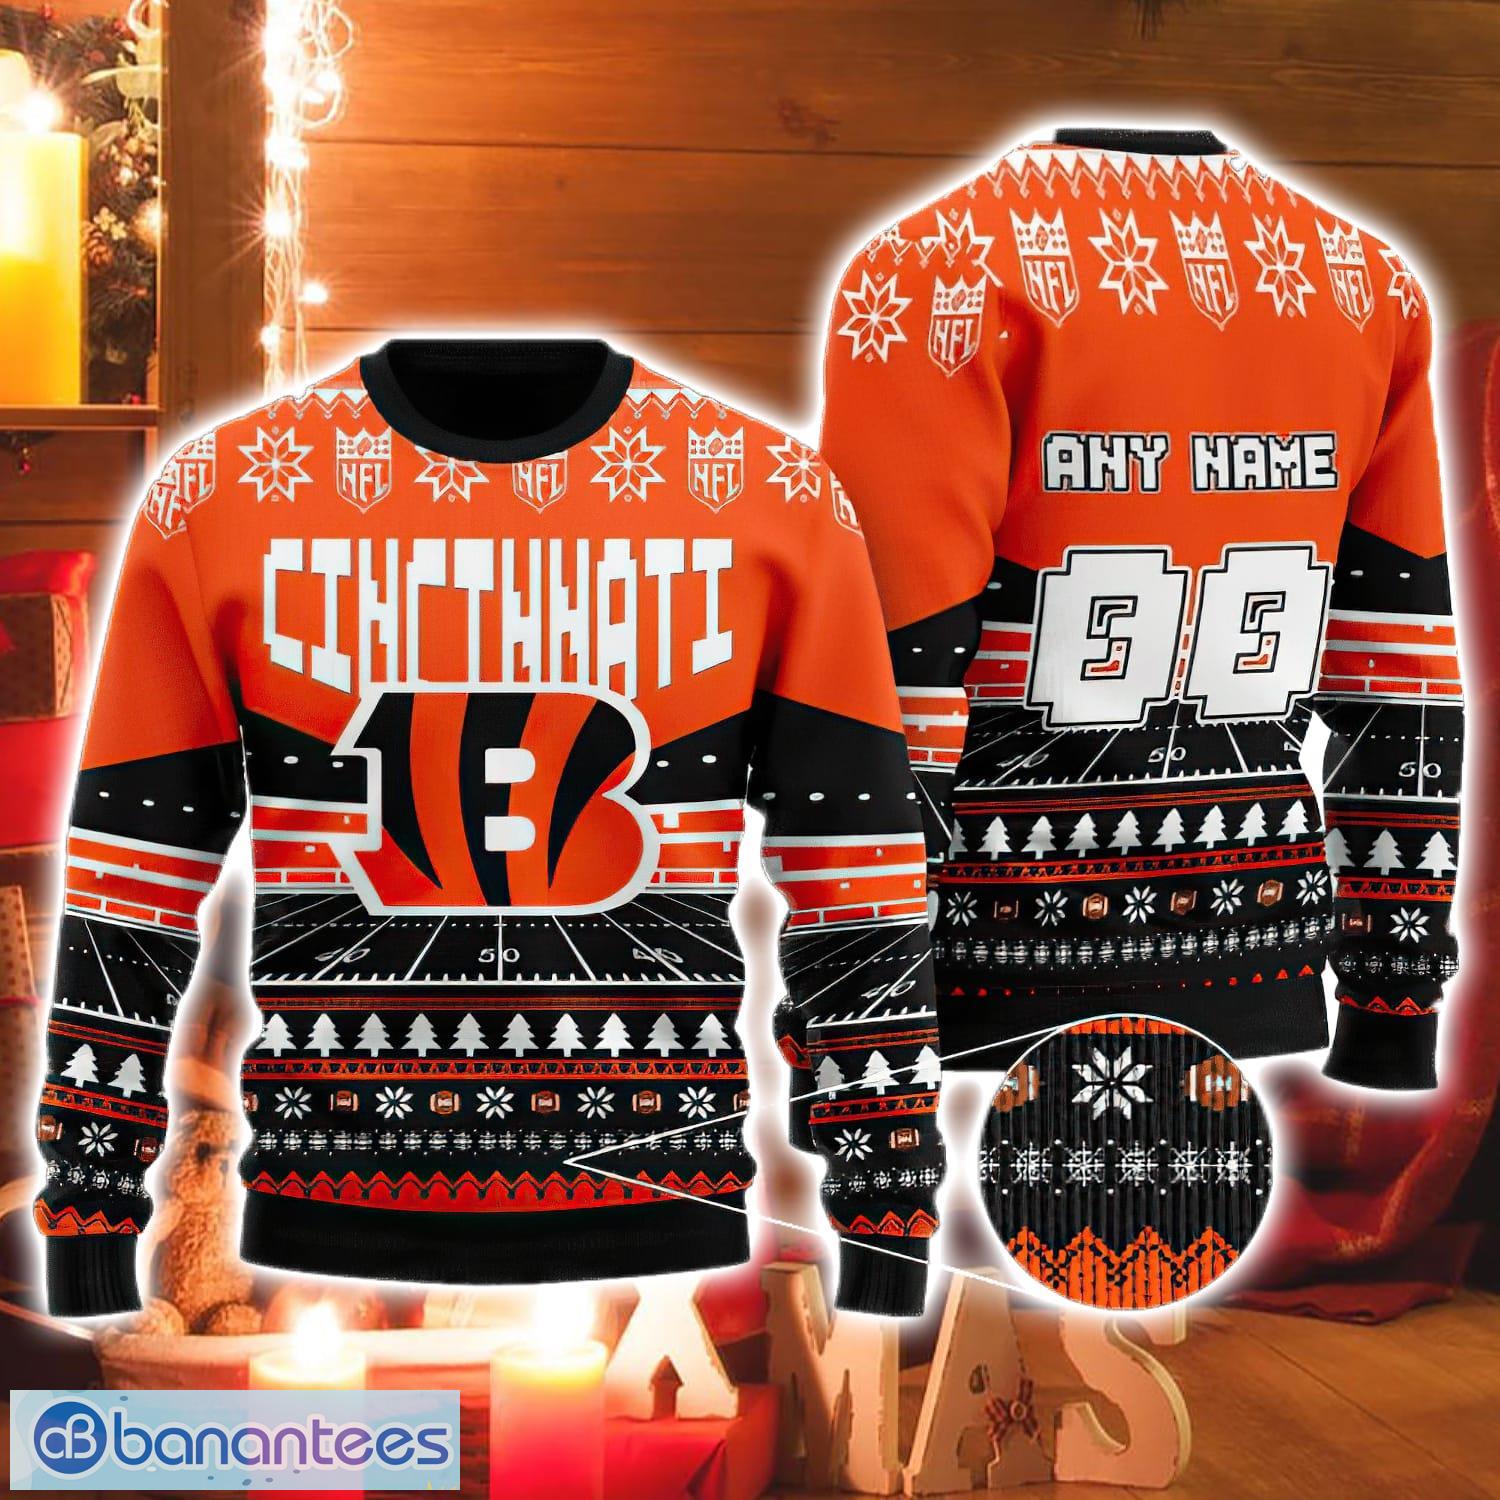 Bengals Holiday Gift Ideas